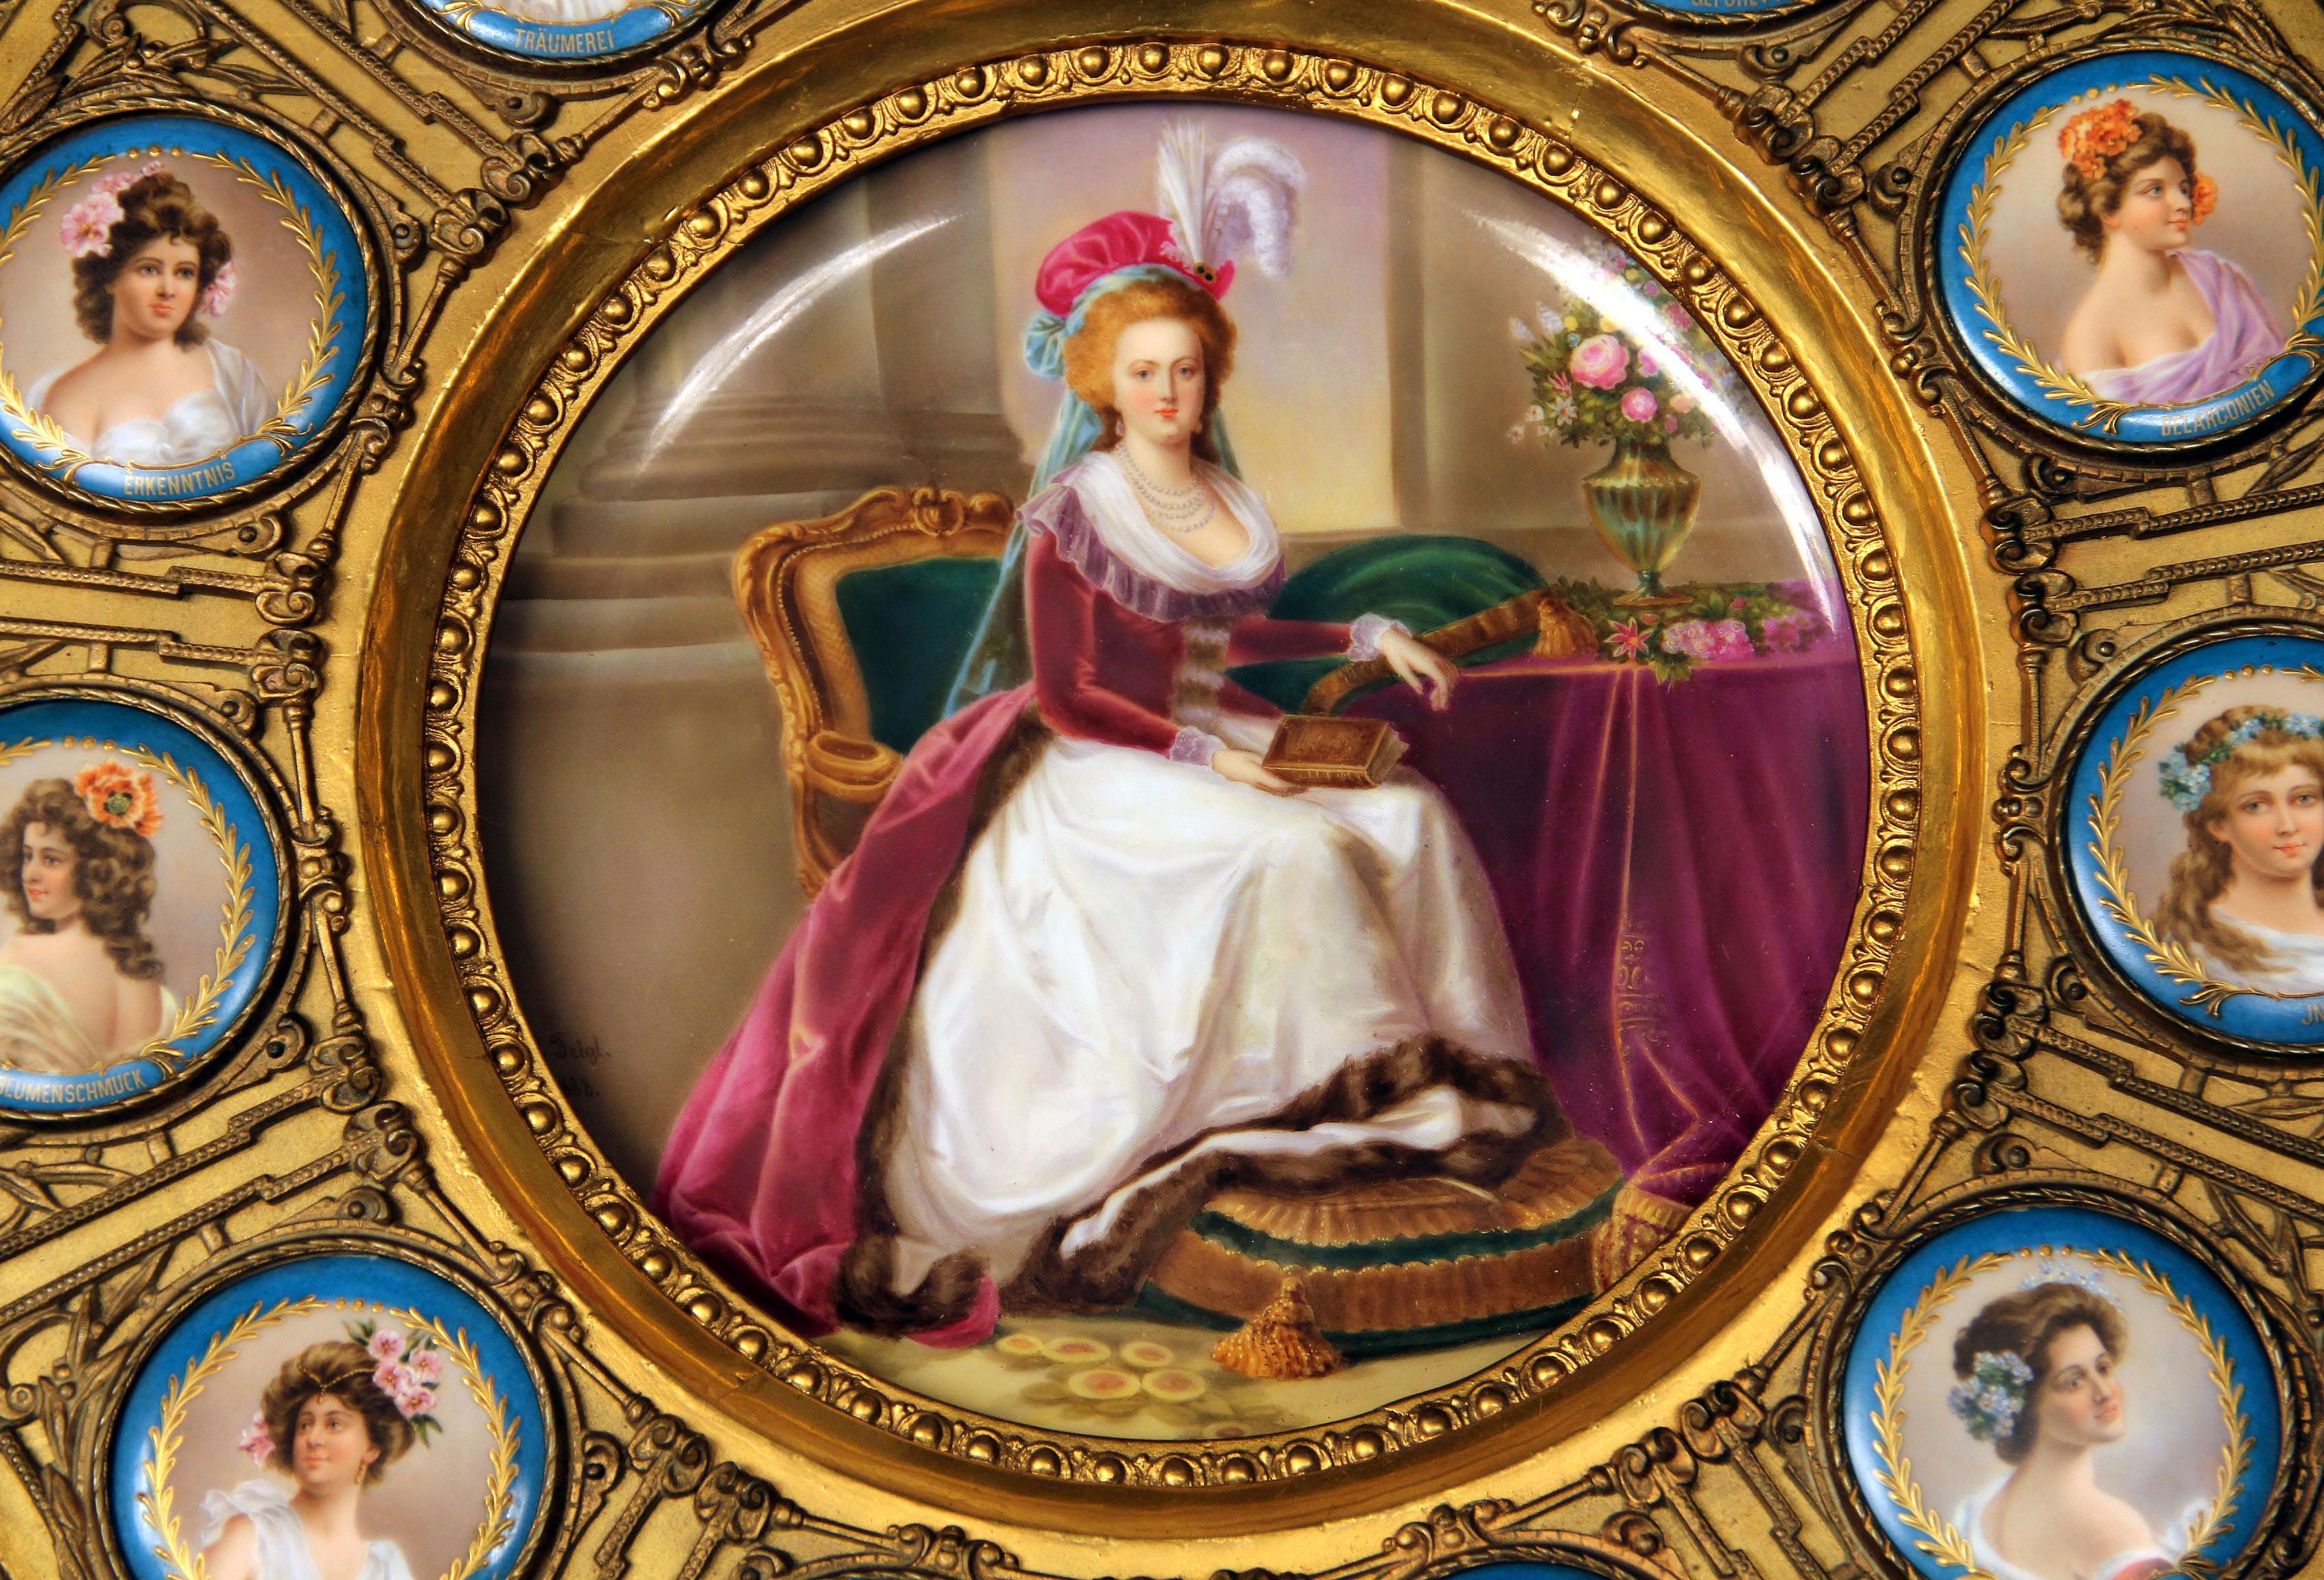 Belle Époque Late 19th Century Vienna Porcelain Mounted Giltwood Frame Signed J. Feigl 1888 For Sale